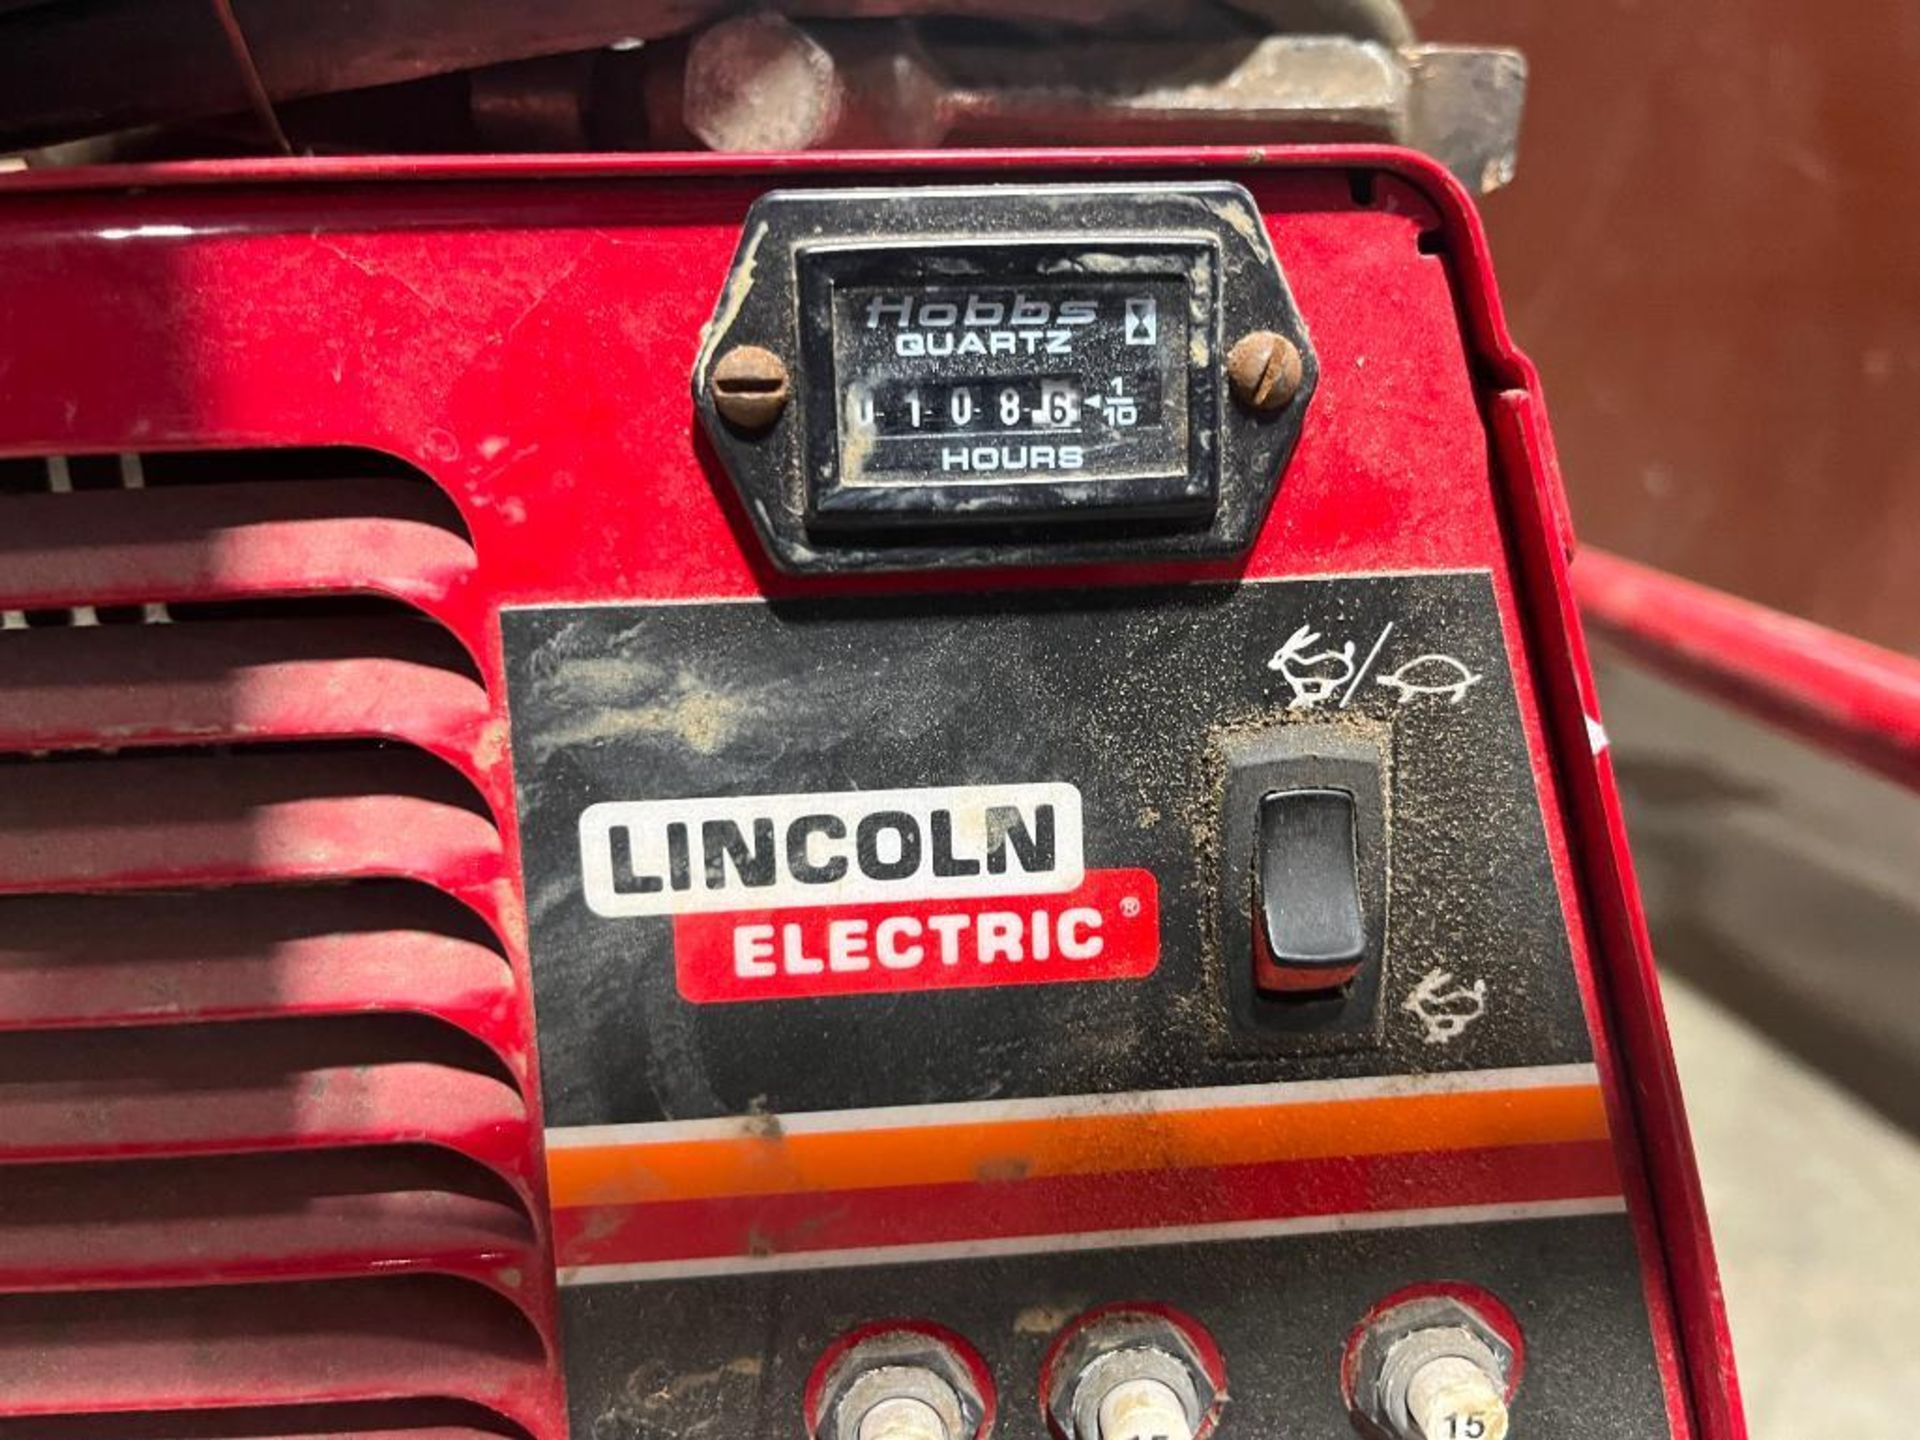 Lincoln Electric WELDANPOWER G3000LX Generator. Approximately 108 hours. - Image 5 of 9